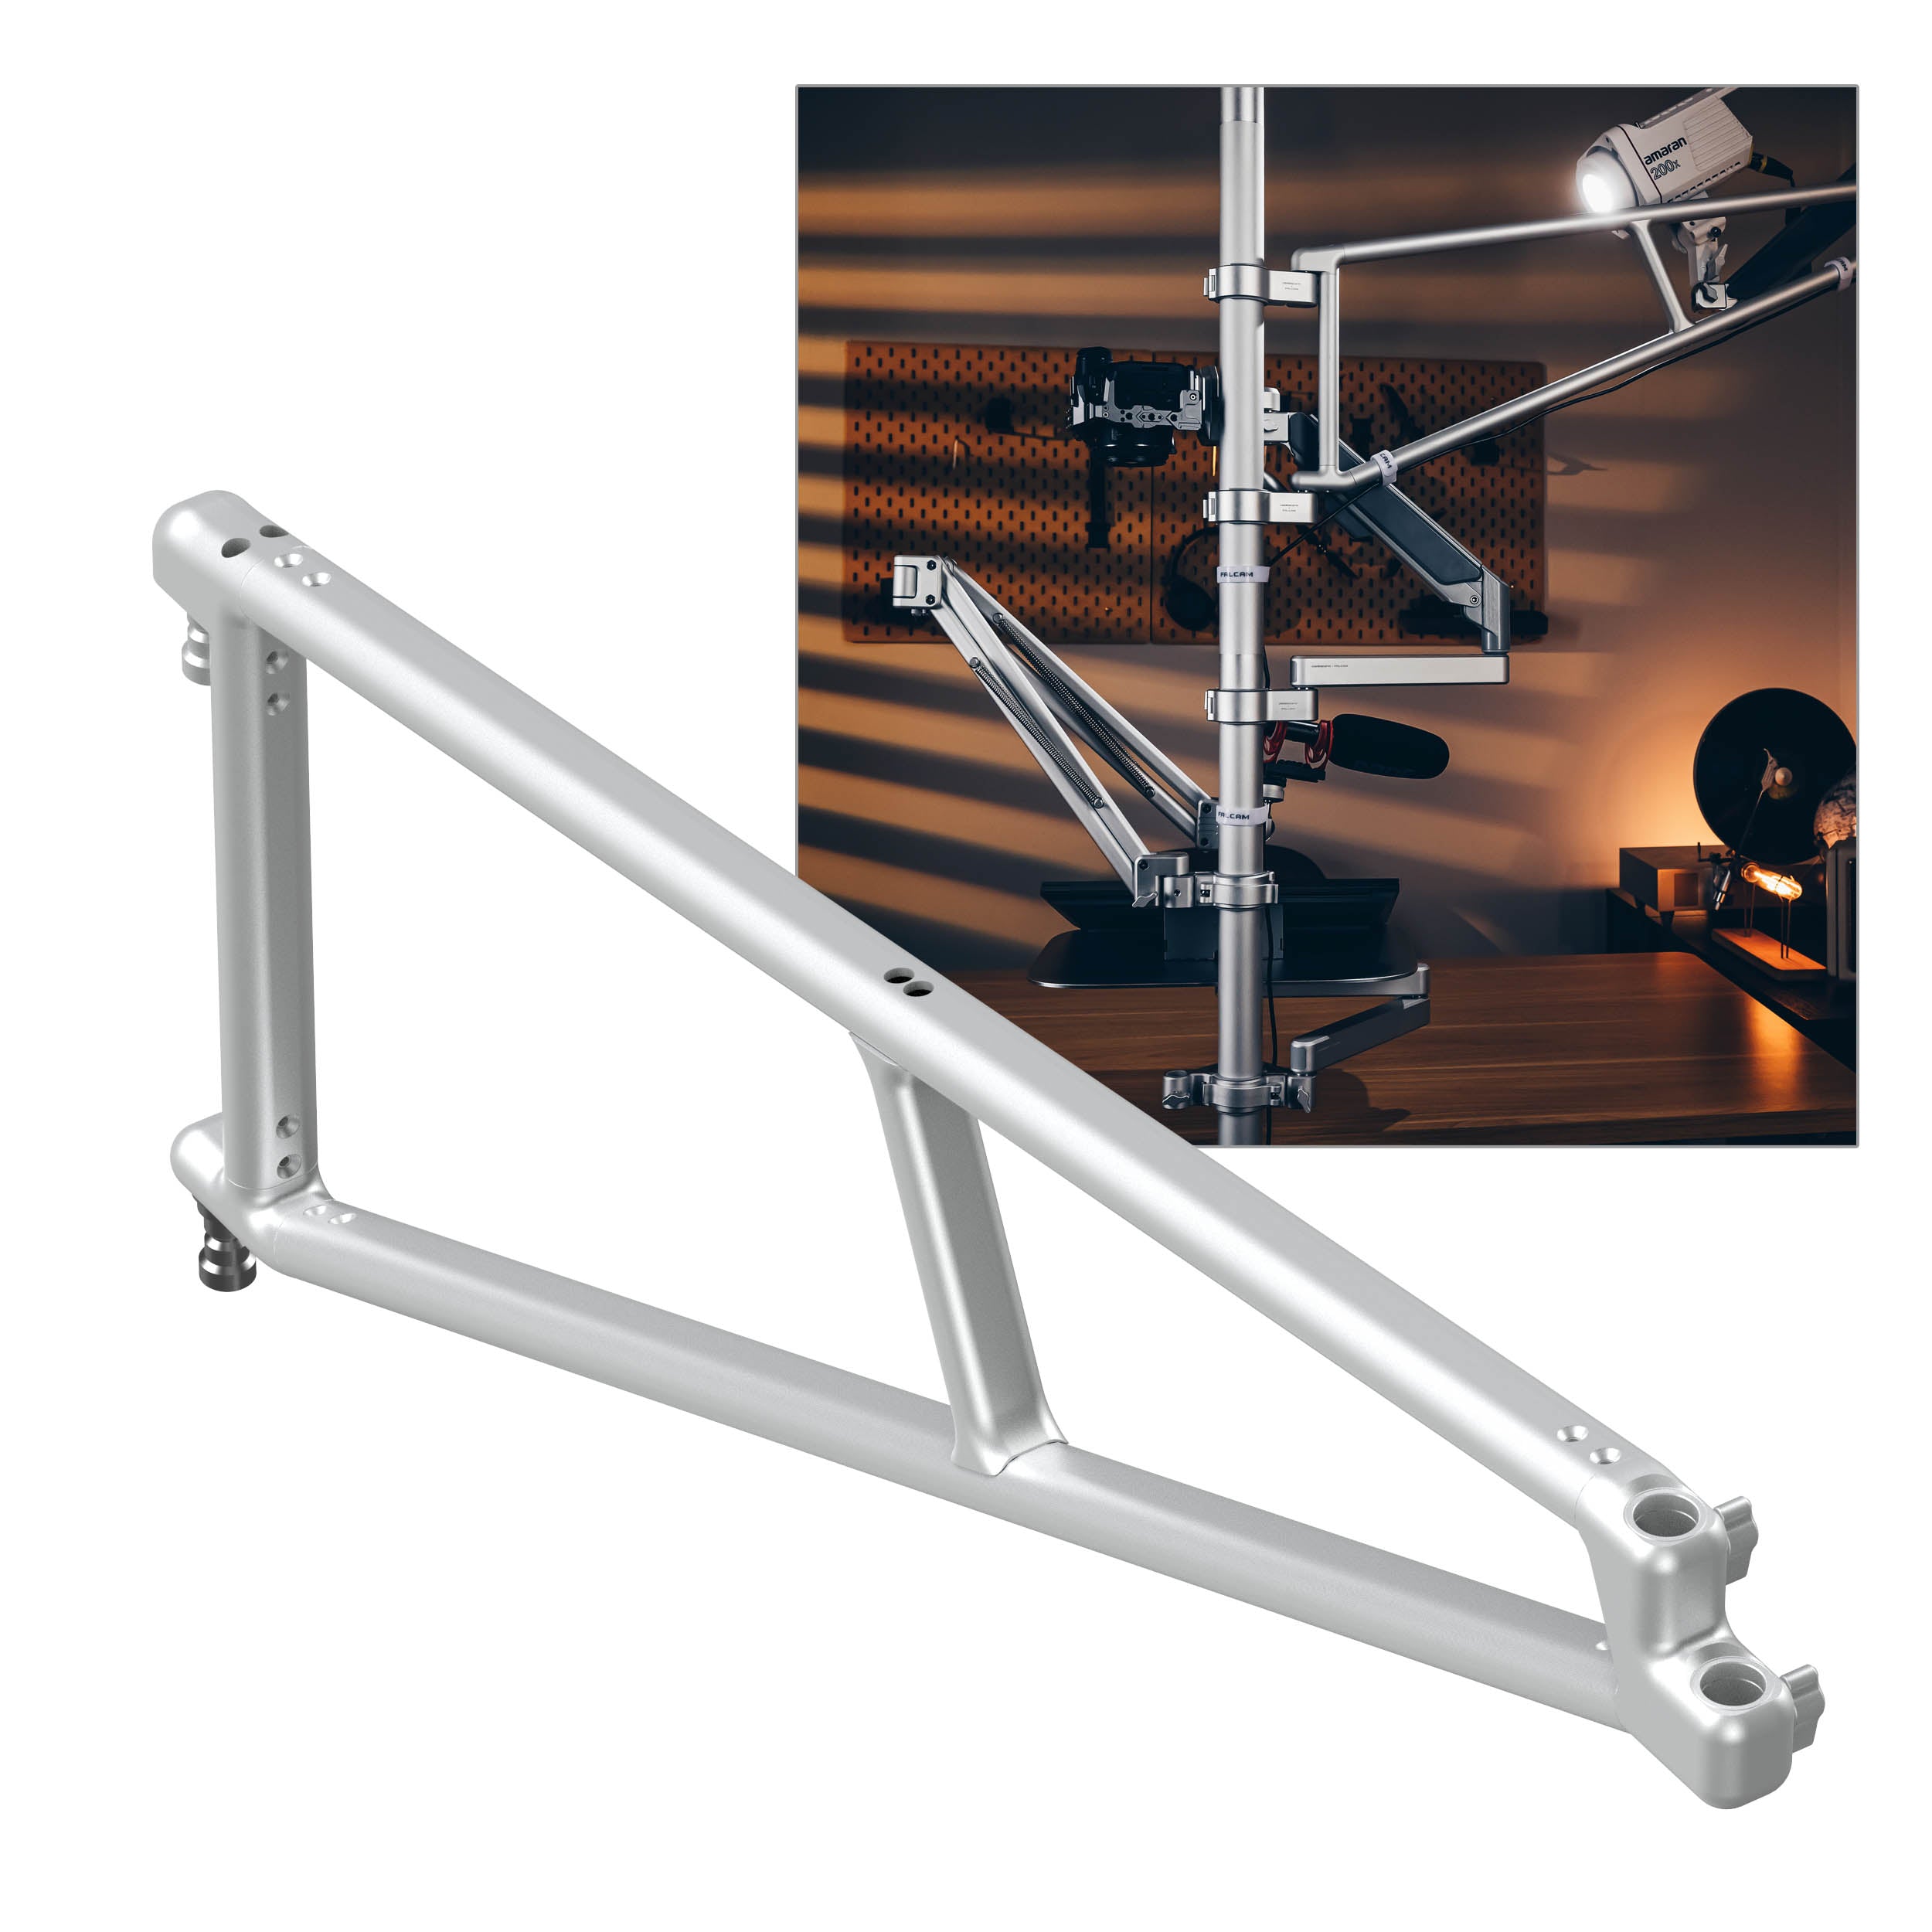 Geartree 2744 Heavy Duty Triangle Extension Arm By PixaPro